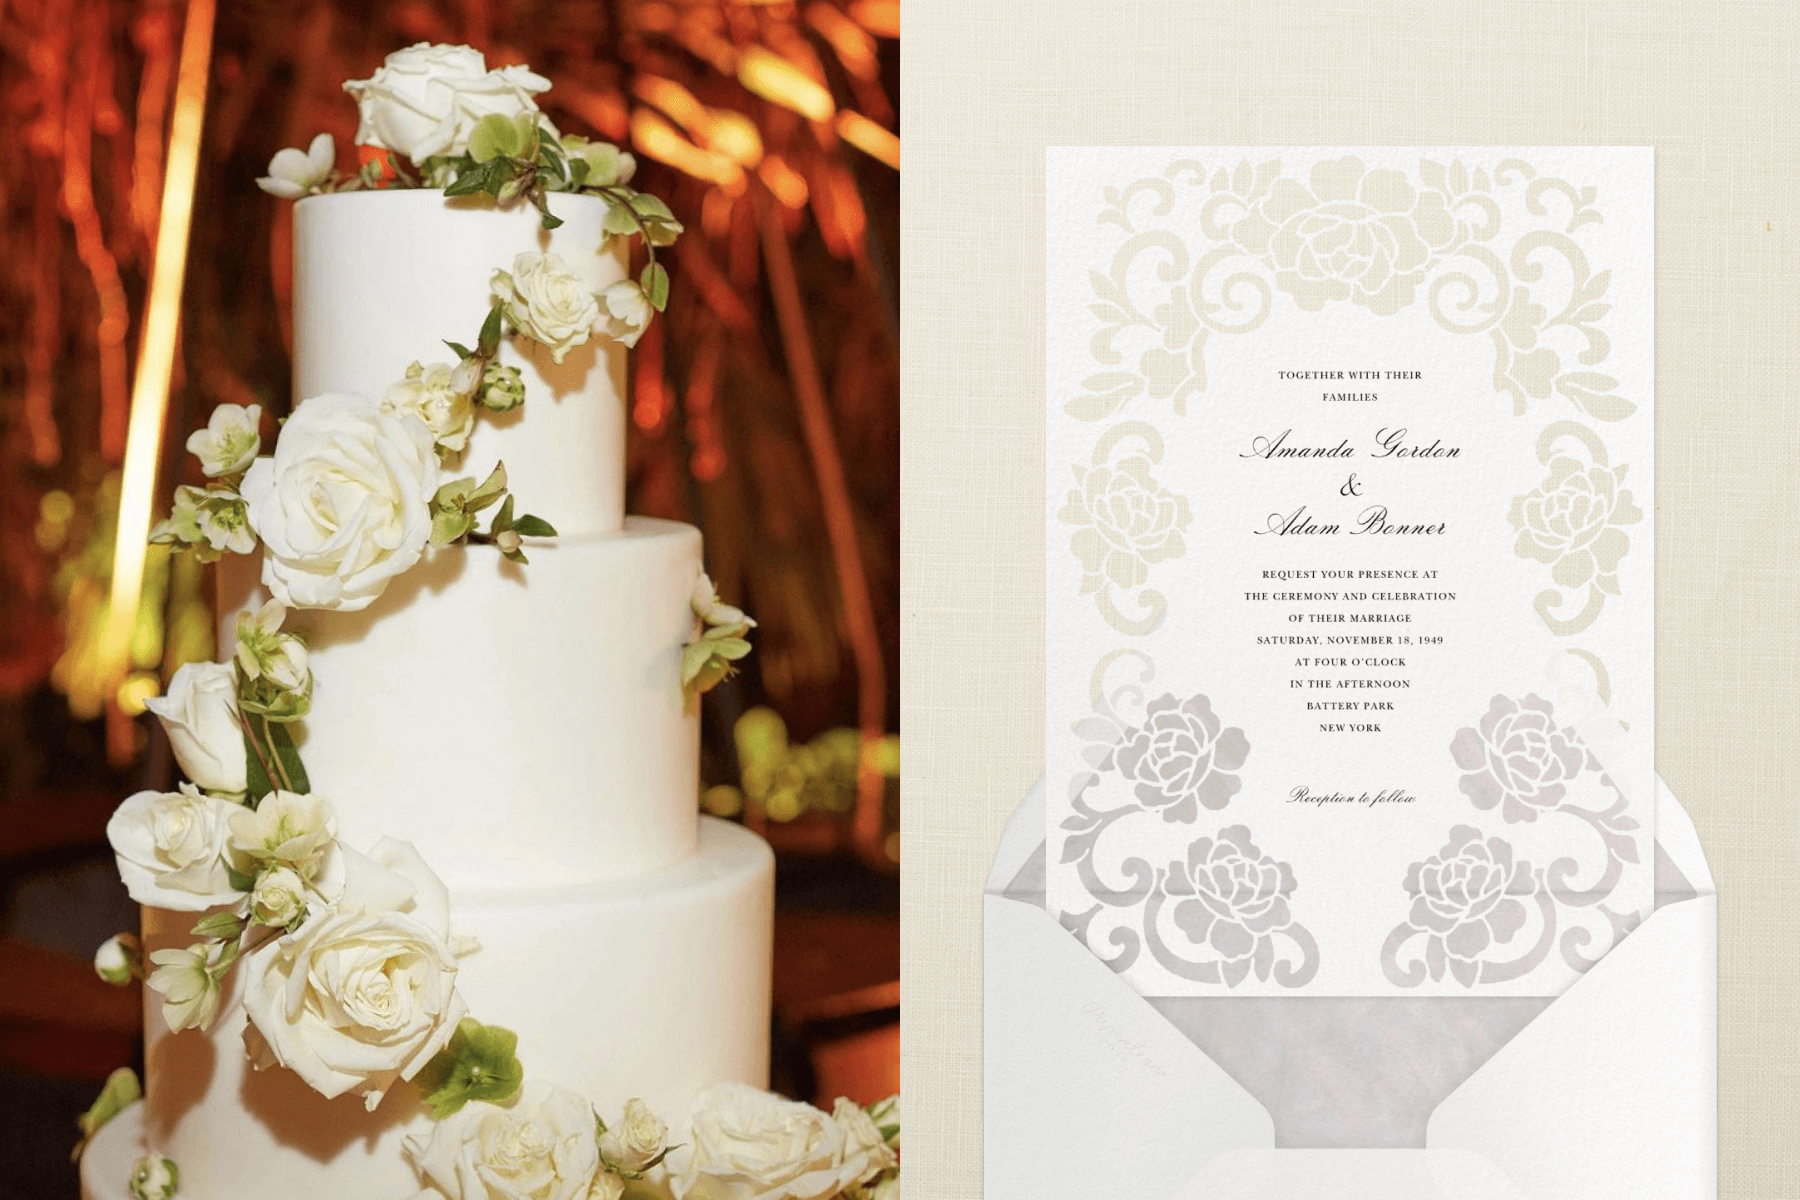 Left: A three-tired wedding cake with flowers; Right: A white wedding invitation with demask floral elements.